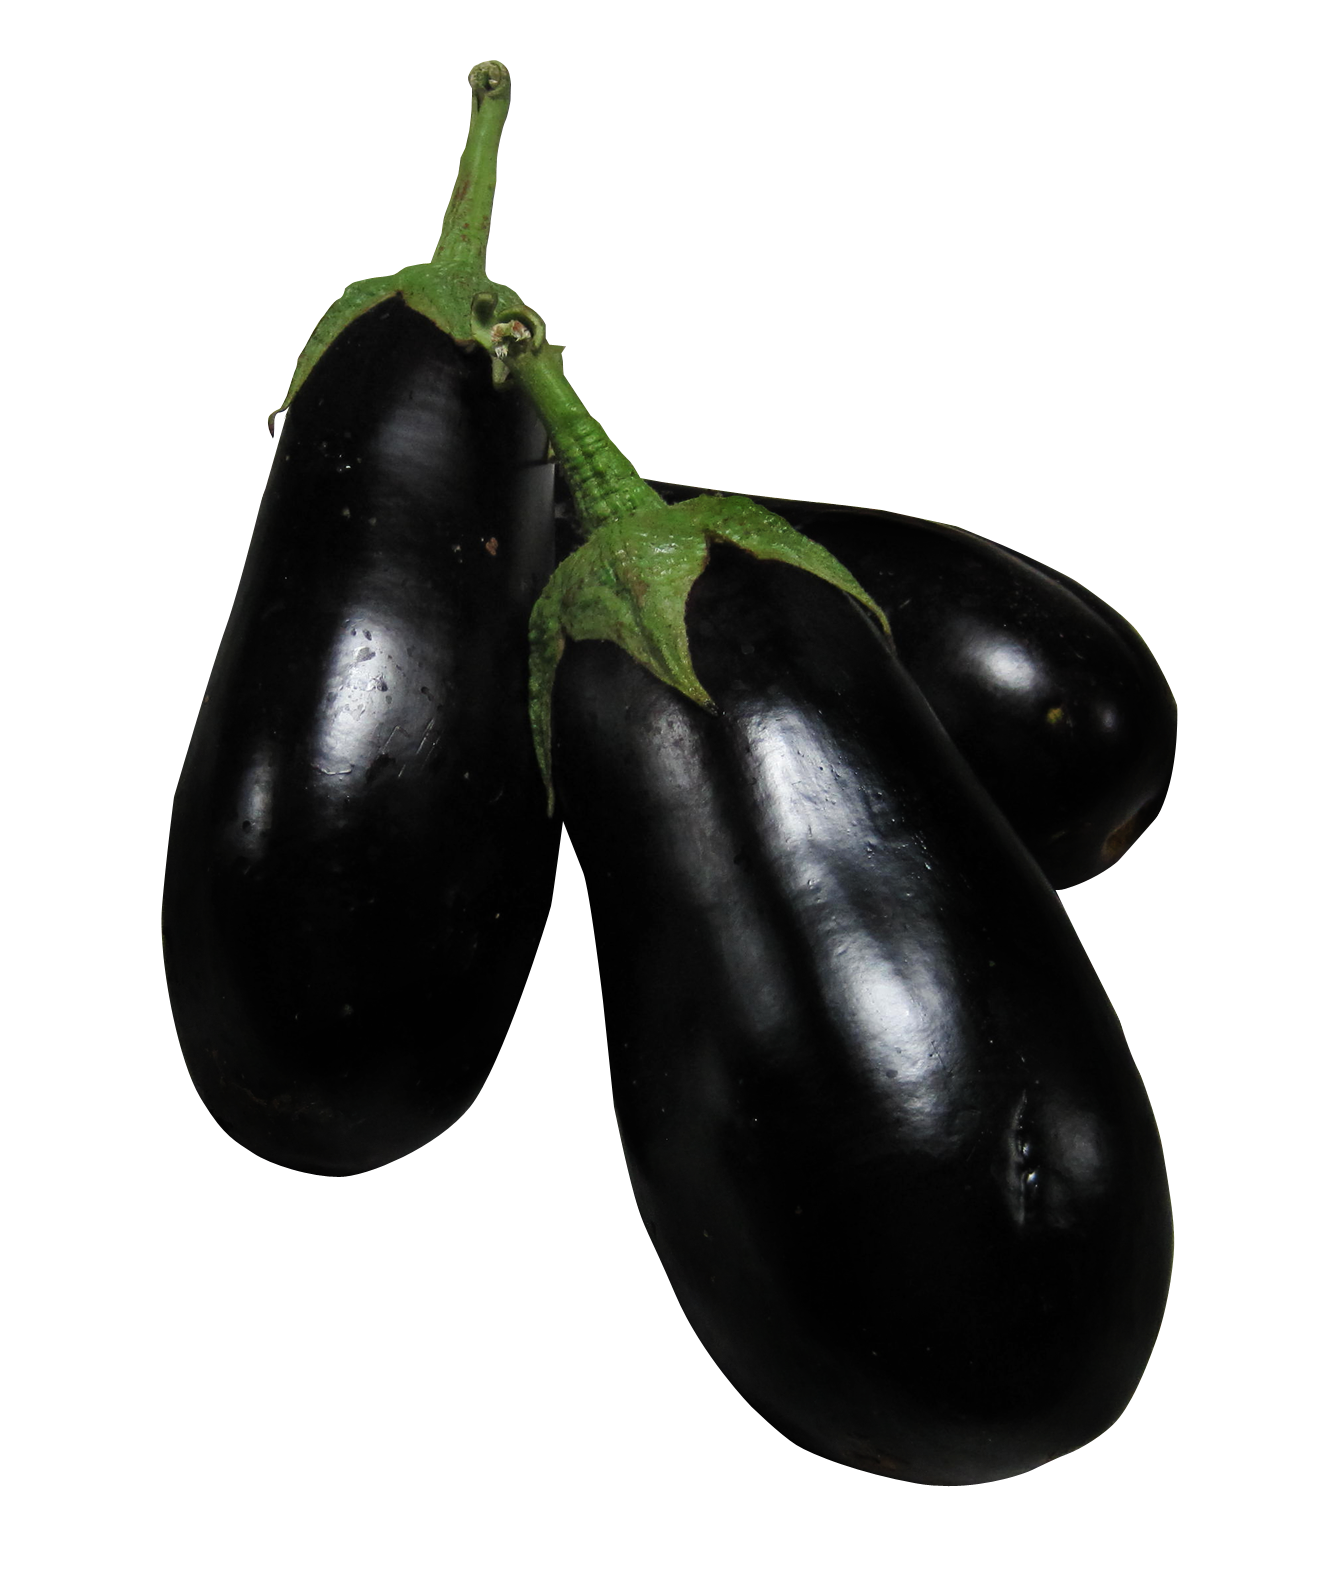 A Group Of Eggplants With Green Leaves